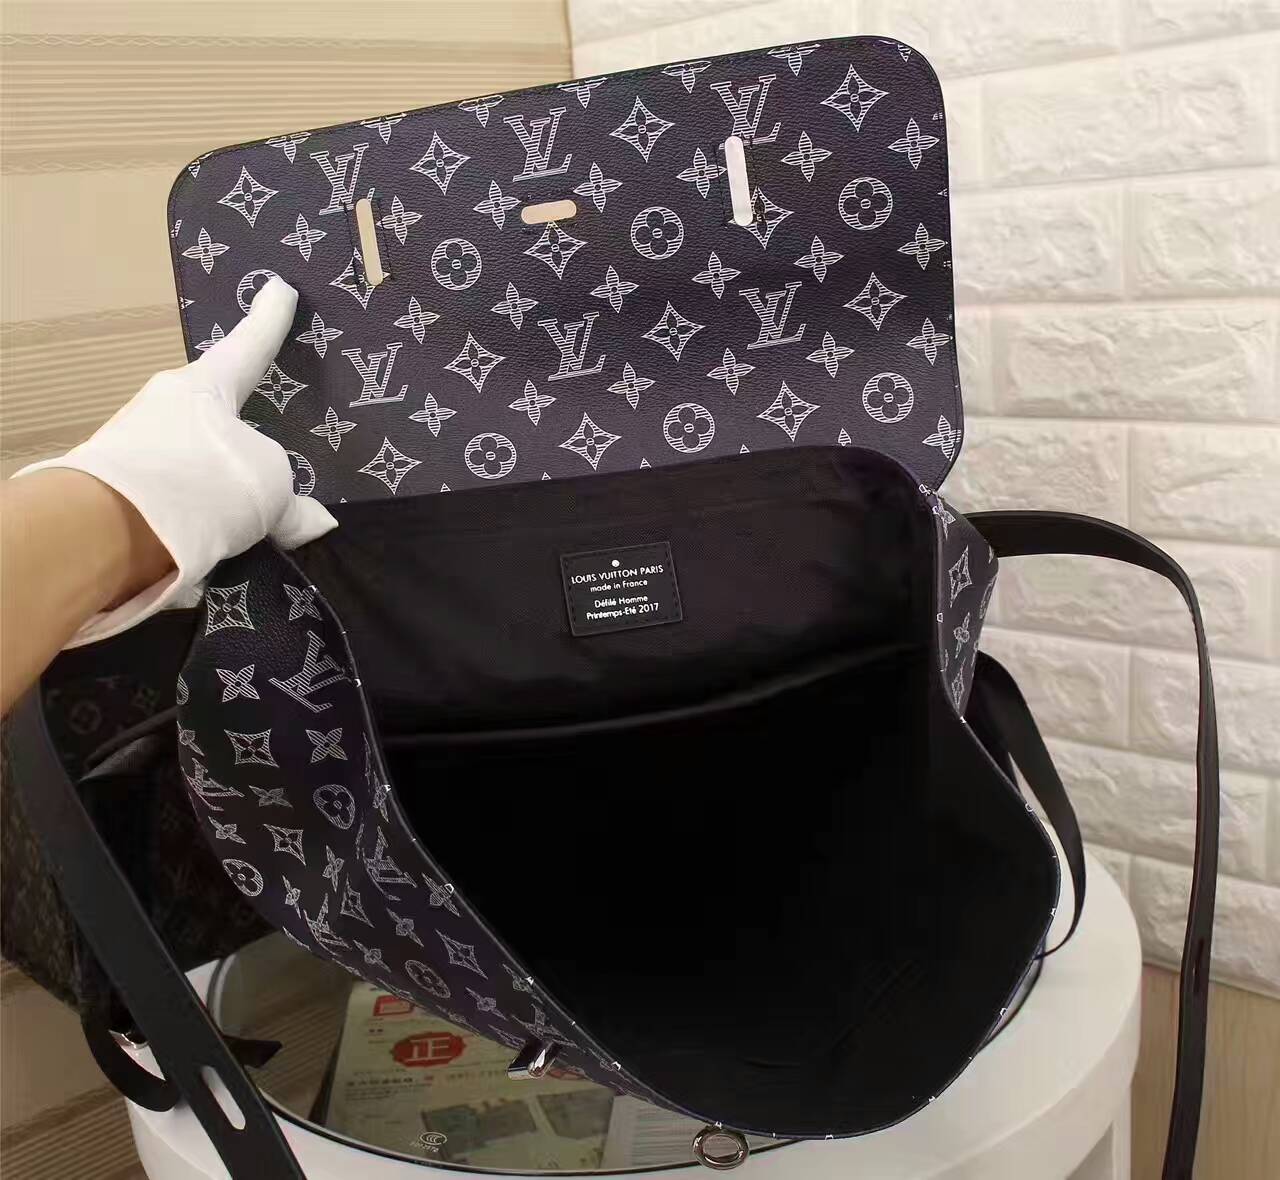 LV Backpack 1:1 Quality-127